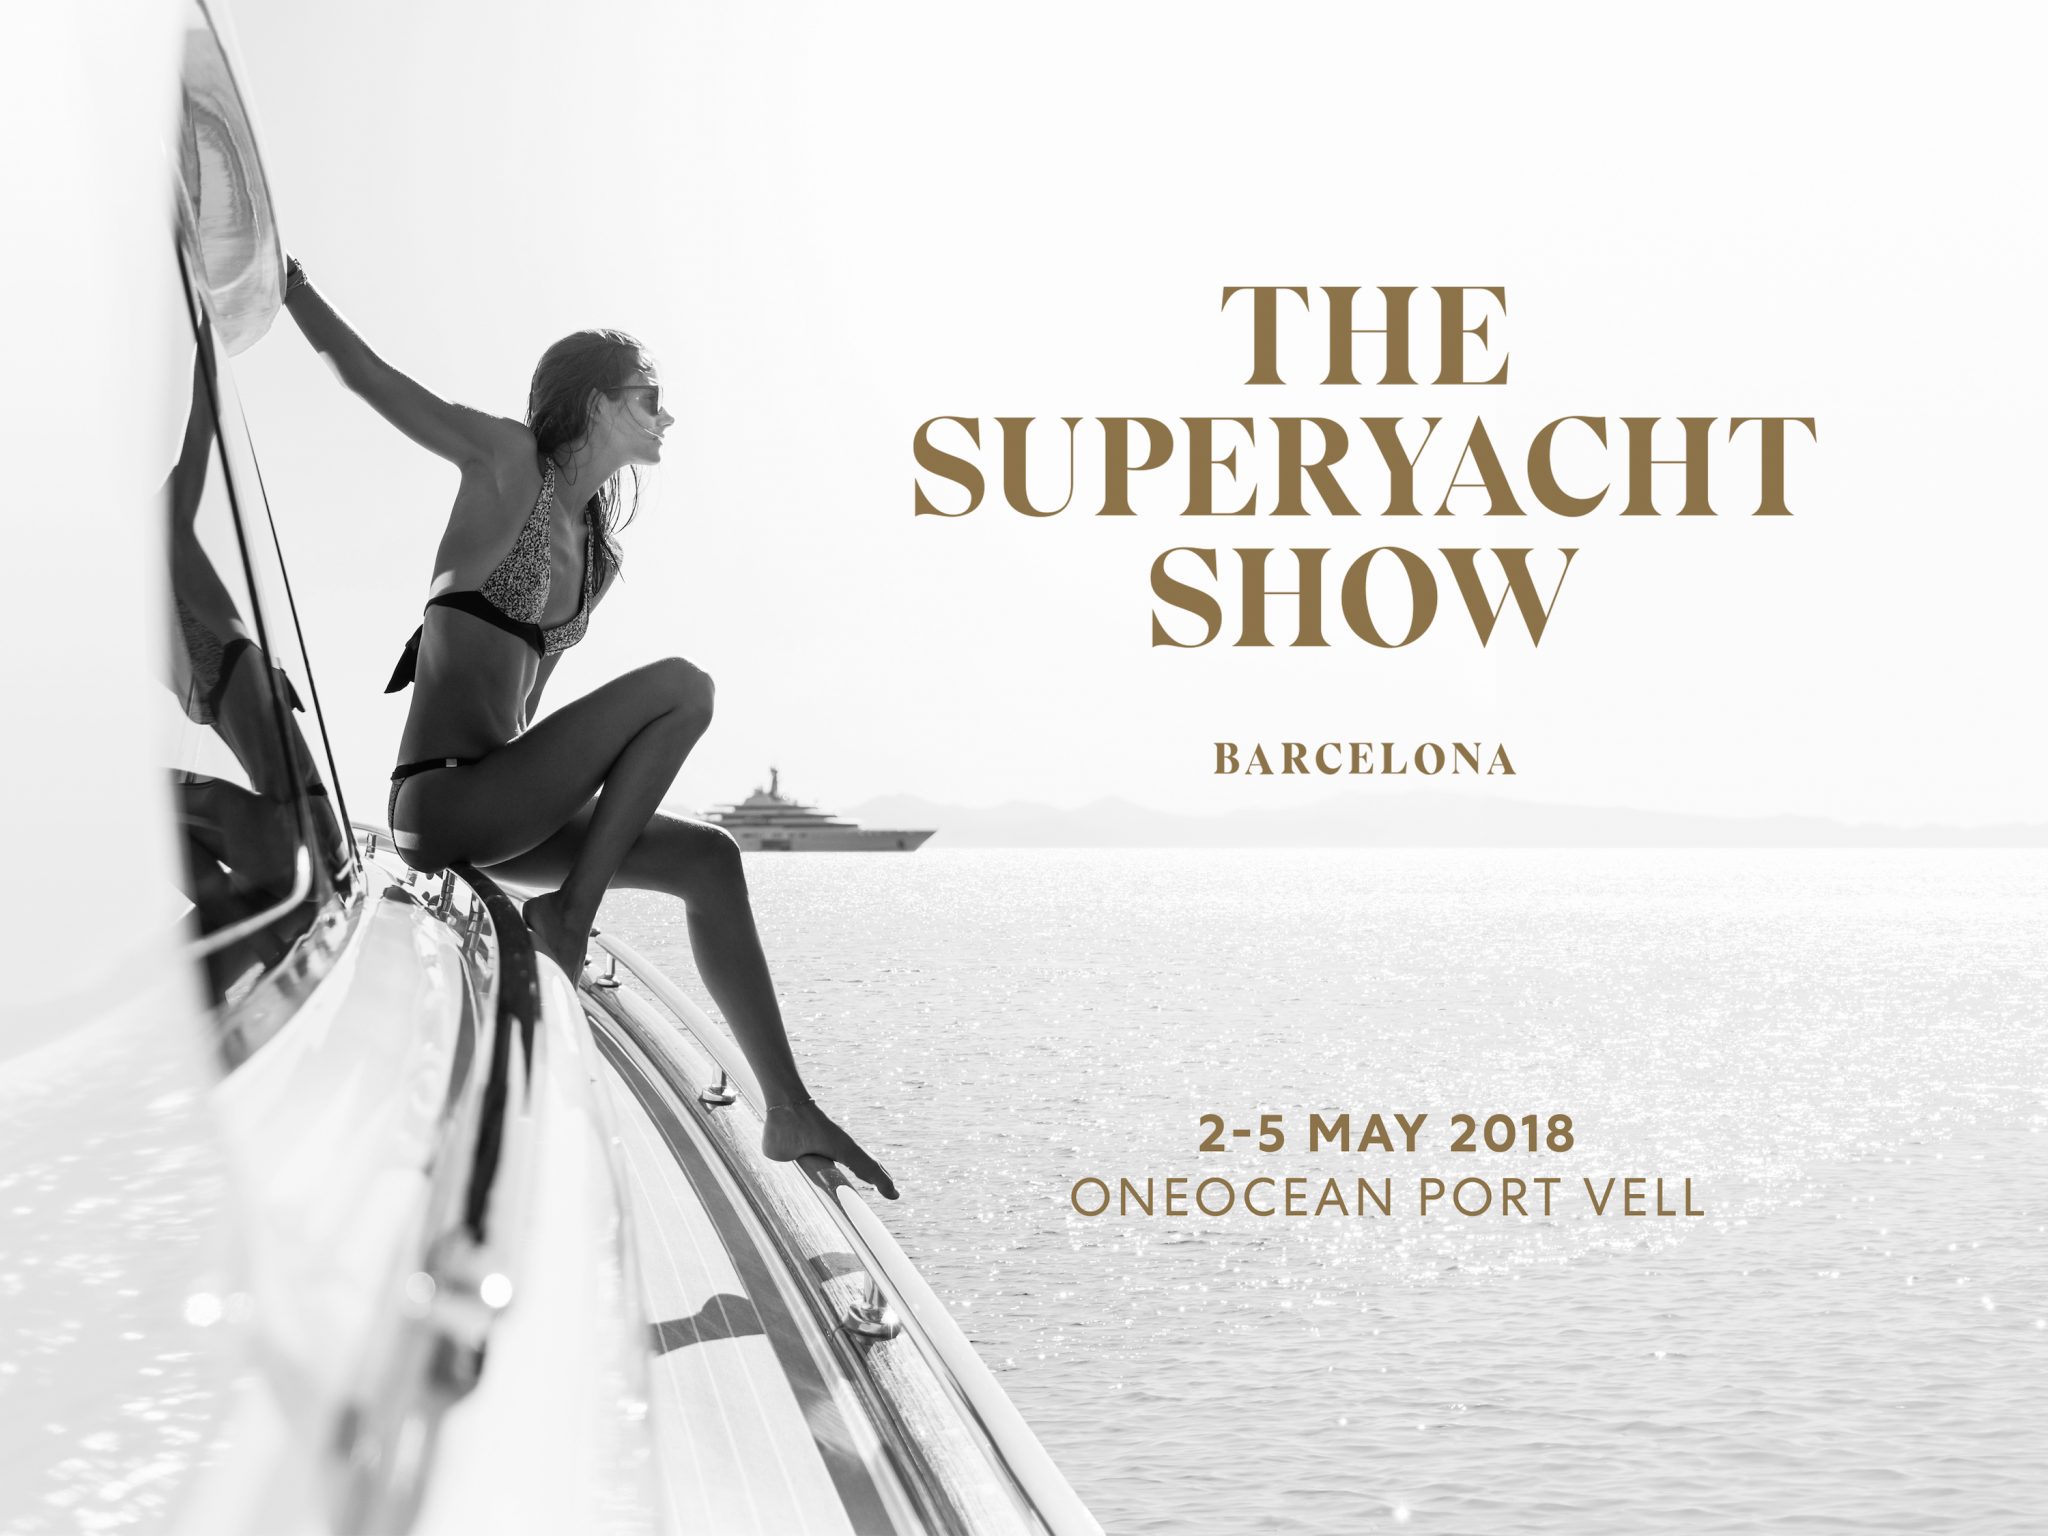 LYBRA launches The Superyacht Show